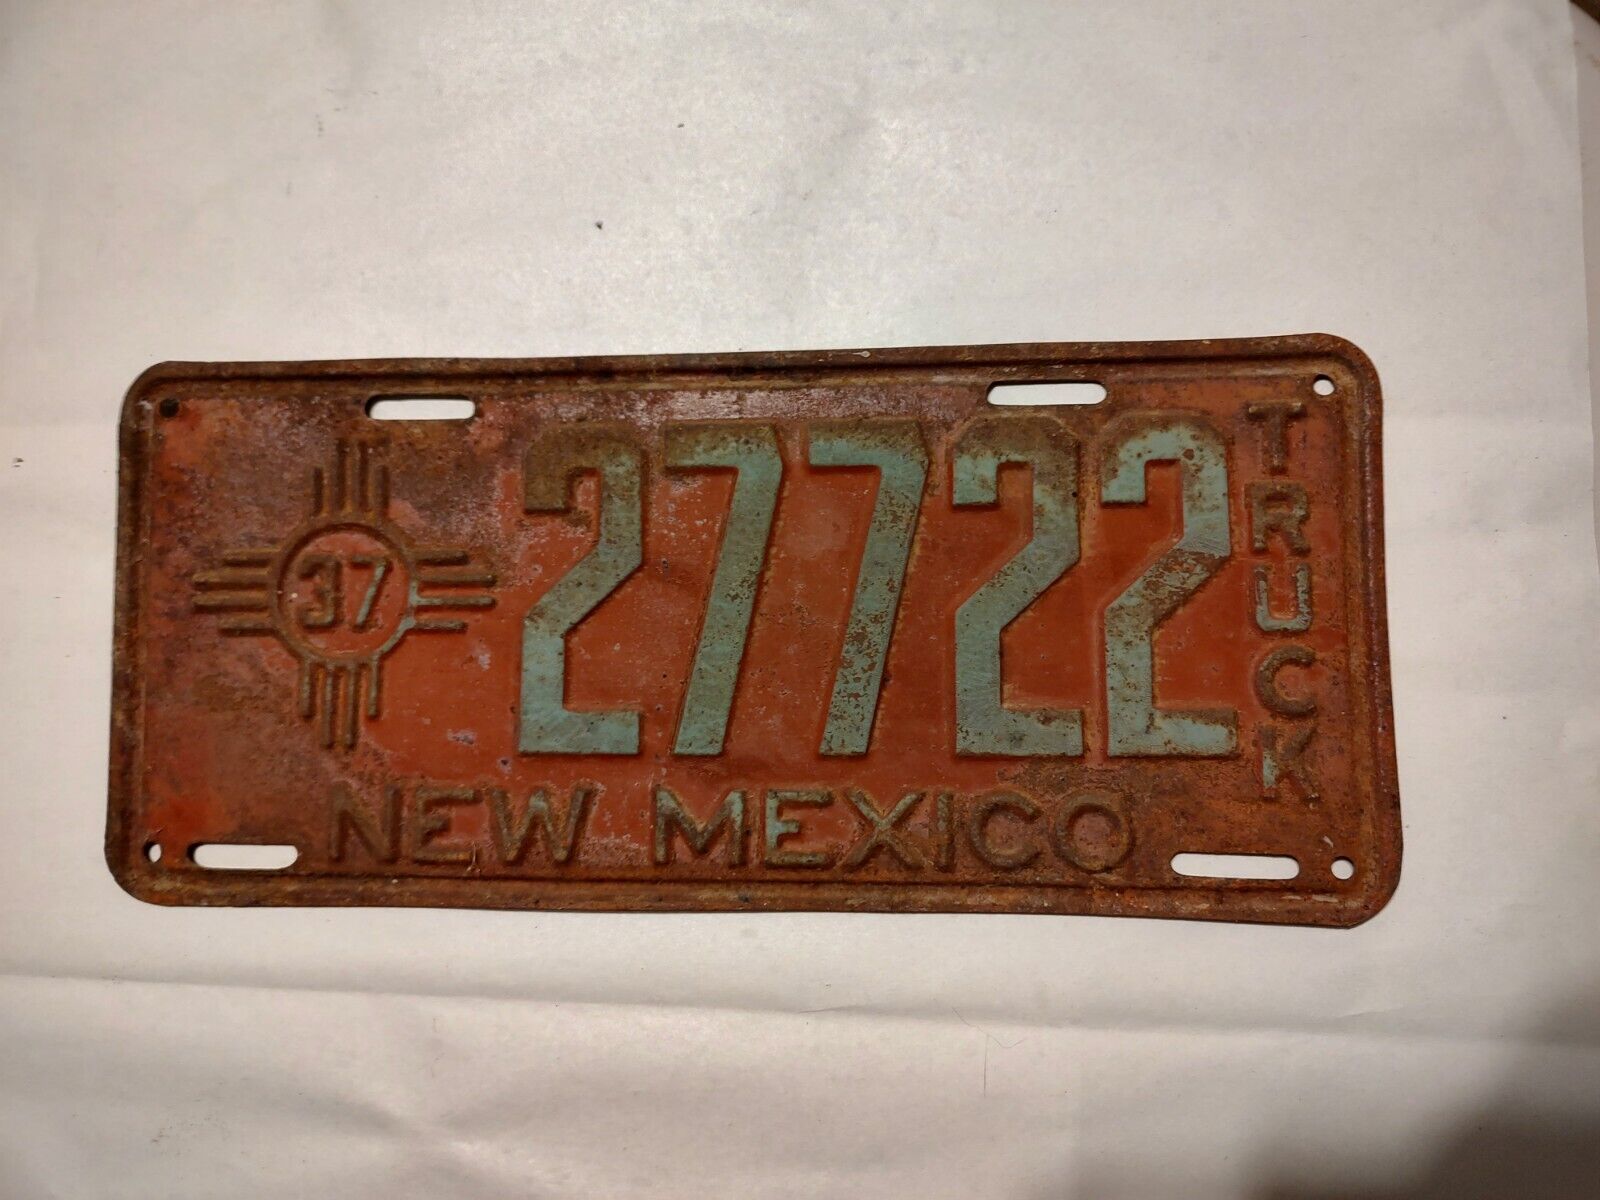 1937 New Mexico Truck 27722 License Plate